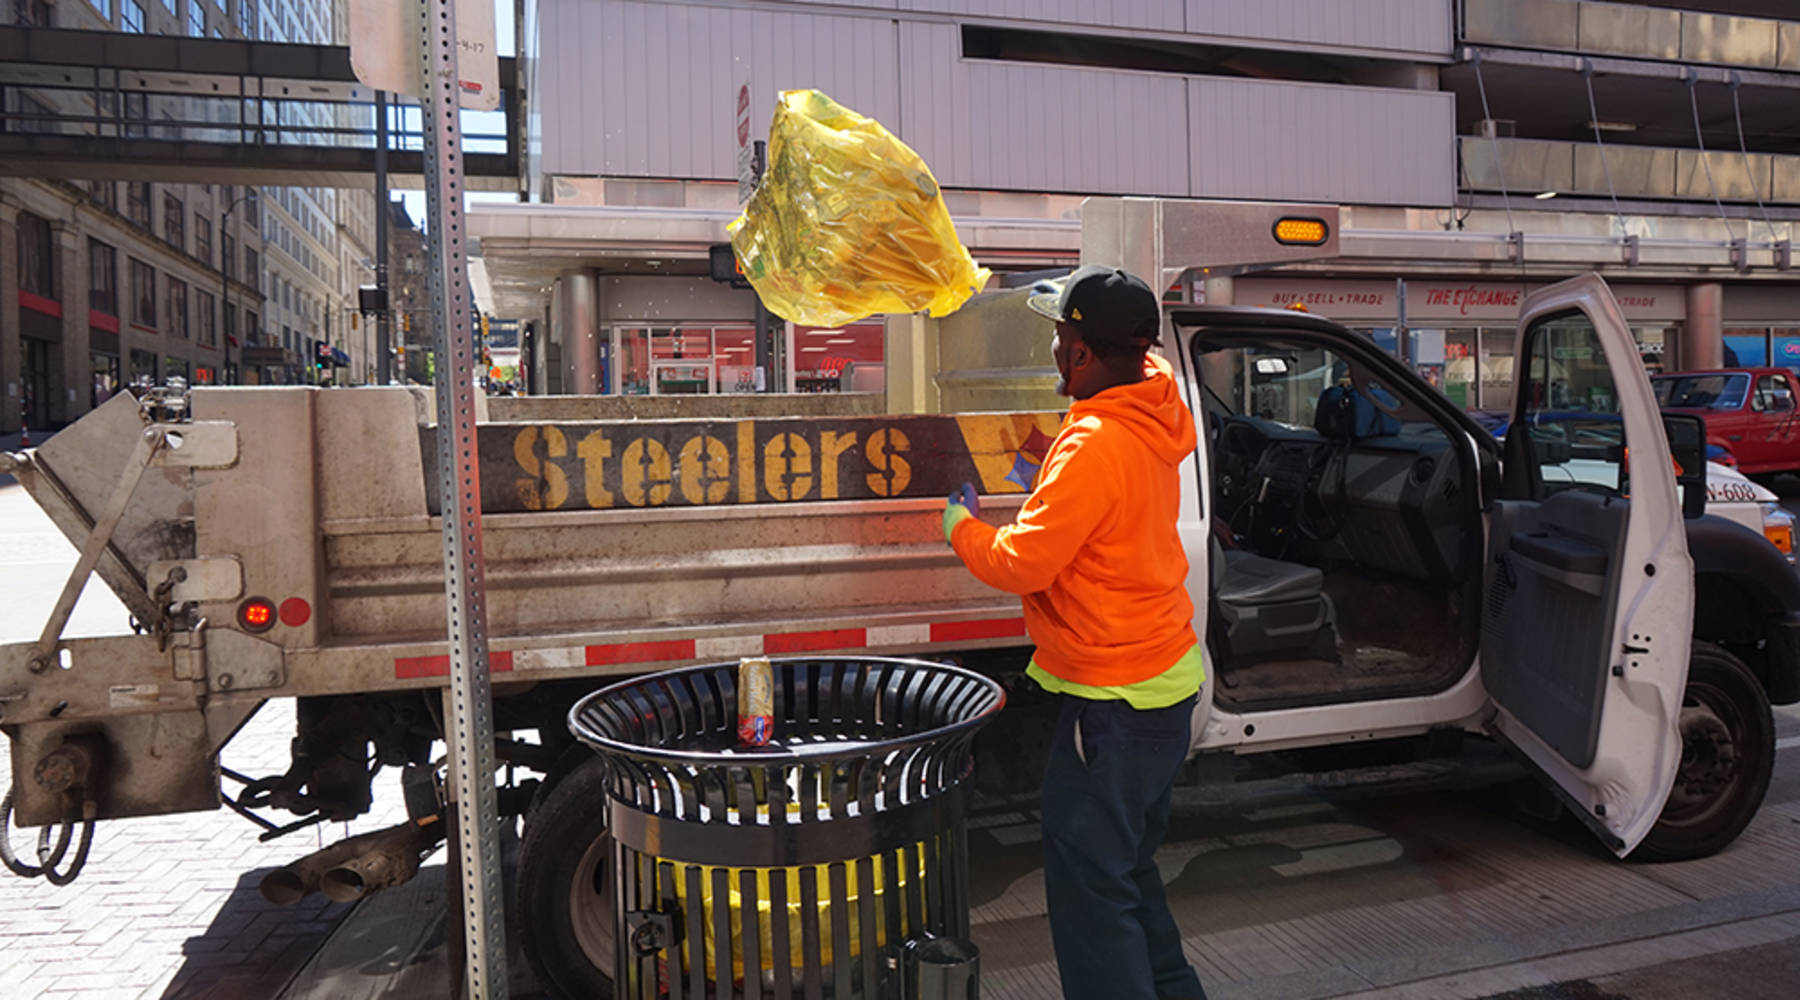 Why Pittsburgh is buying $1,200 garbage cans - Marketplace